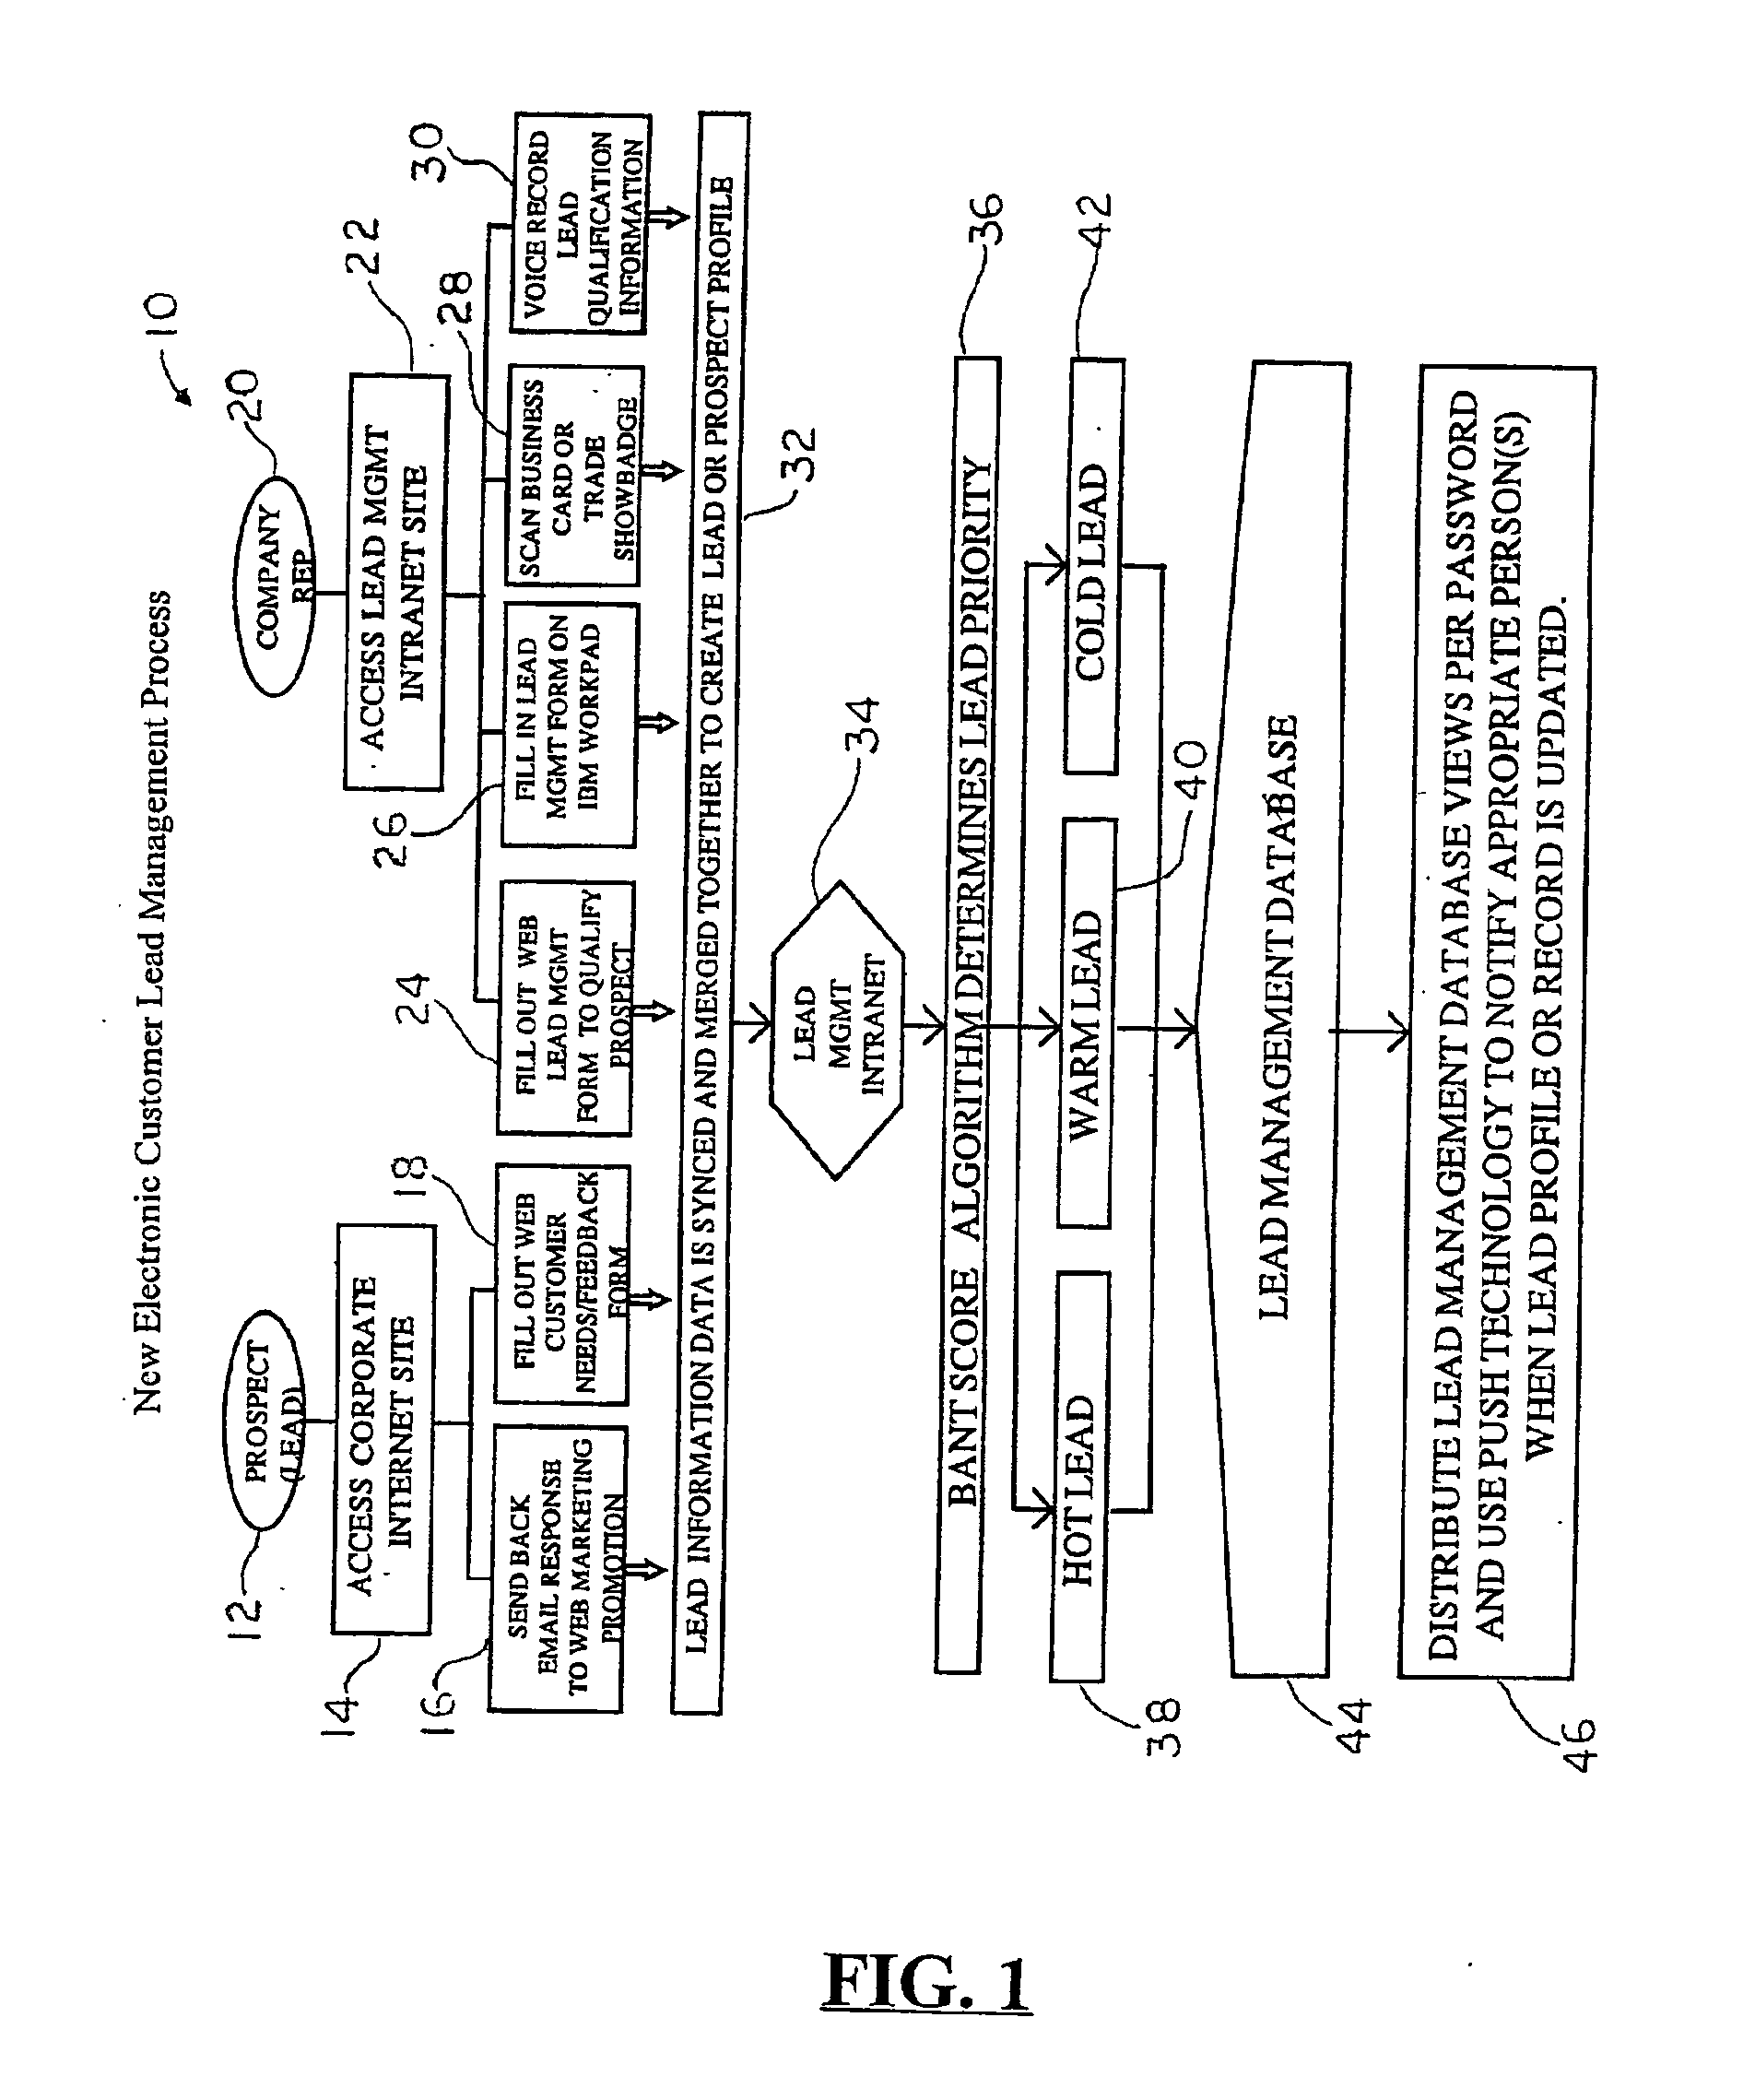 System and method for generating, capturing, and managing customer lead information over a computer network